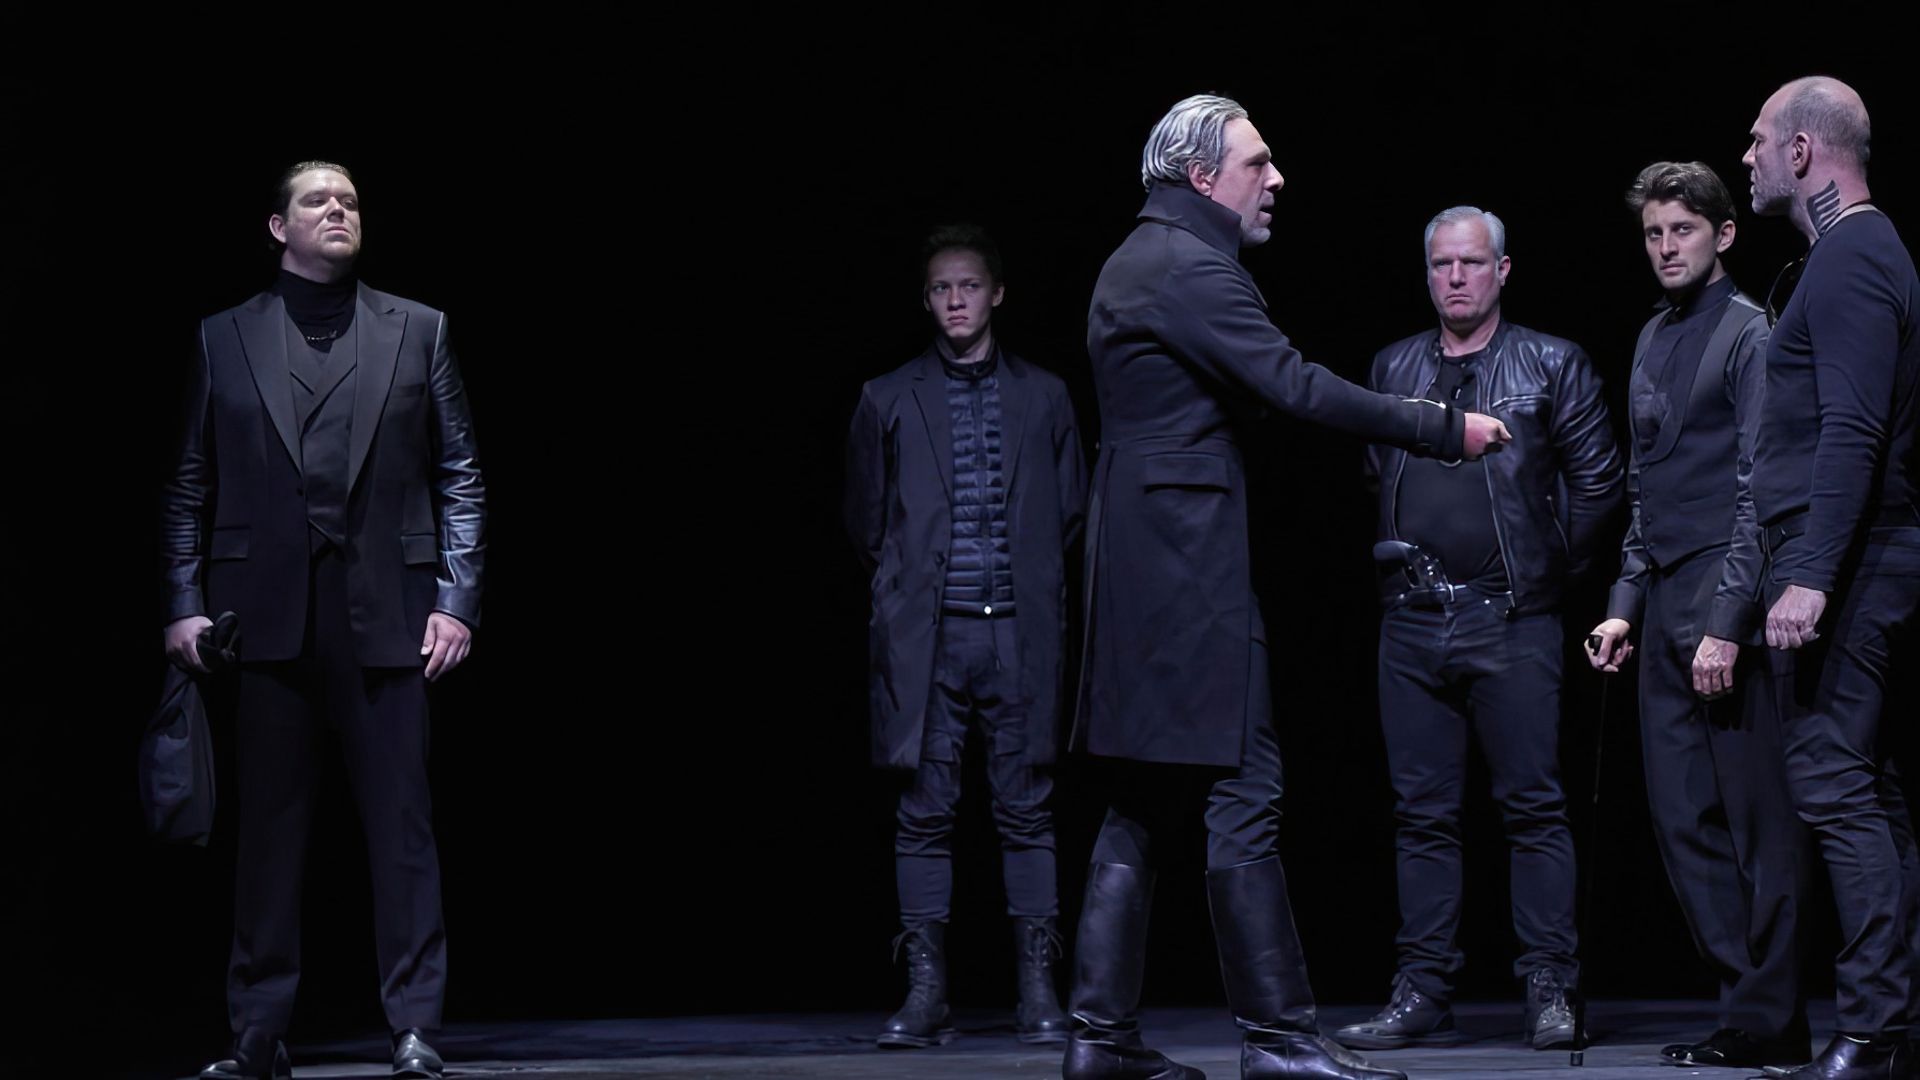 Felix Kammerer in the opera 'Don Carlos' (second from left)